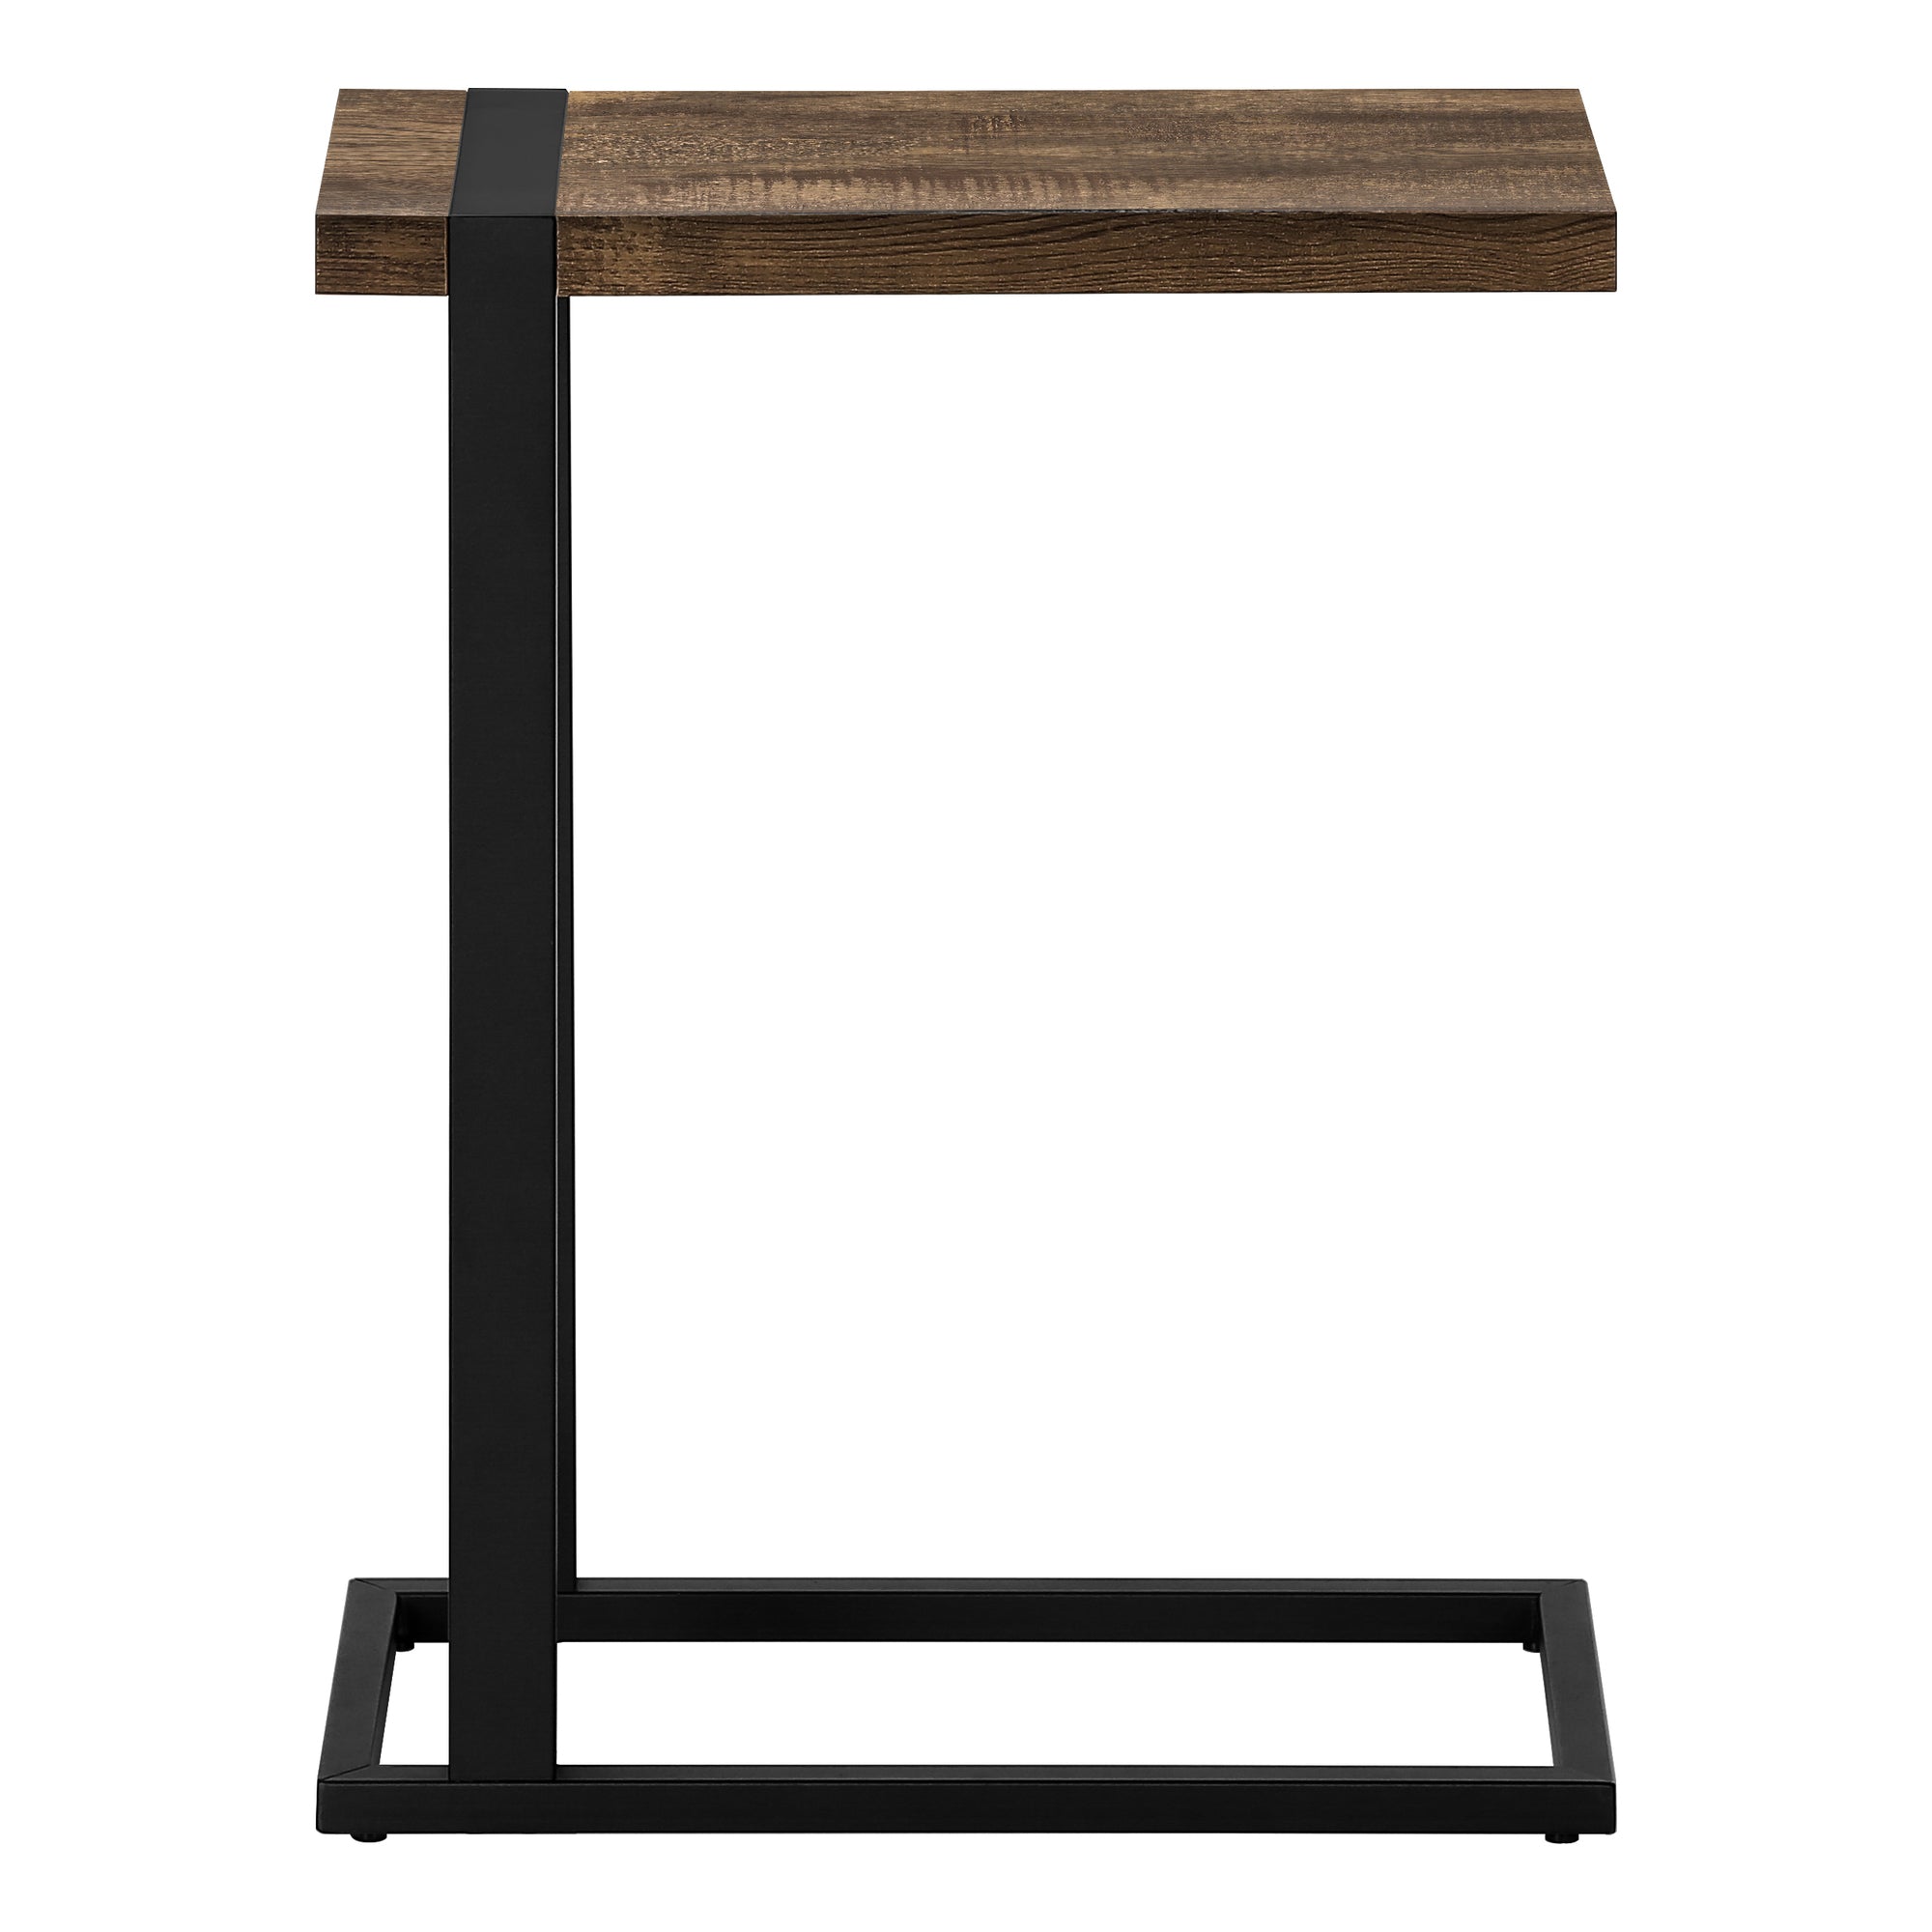 MN-582853    Accent Table, C-Shaped, End, Side, Snack, Living Room, Bedroom, Metal Legs, Laminate, Brown Reclaimed Wood Look, Black, Contemporary, Industrial, Modern